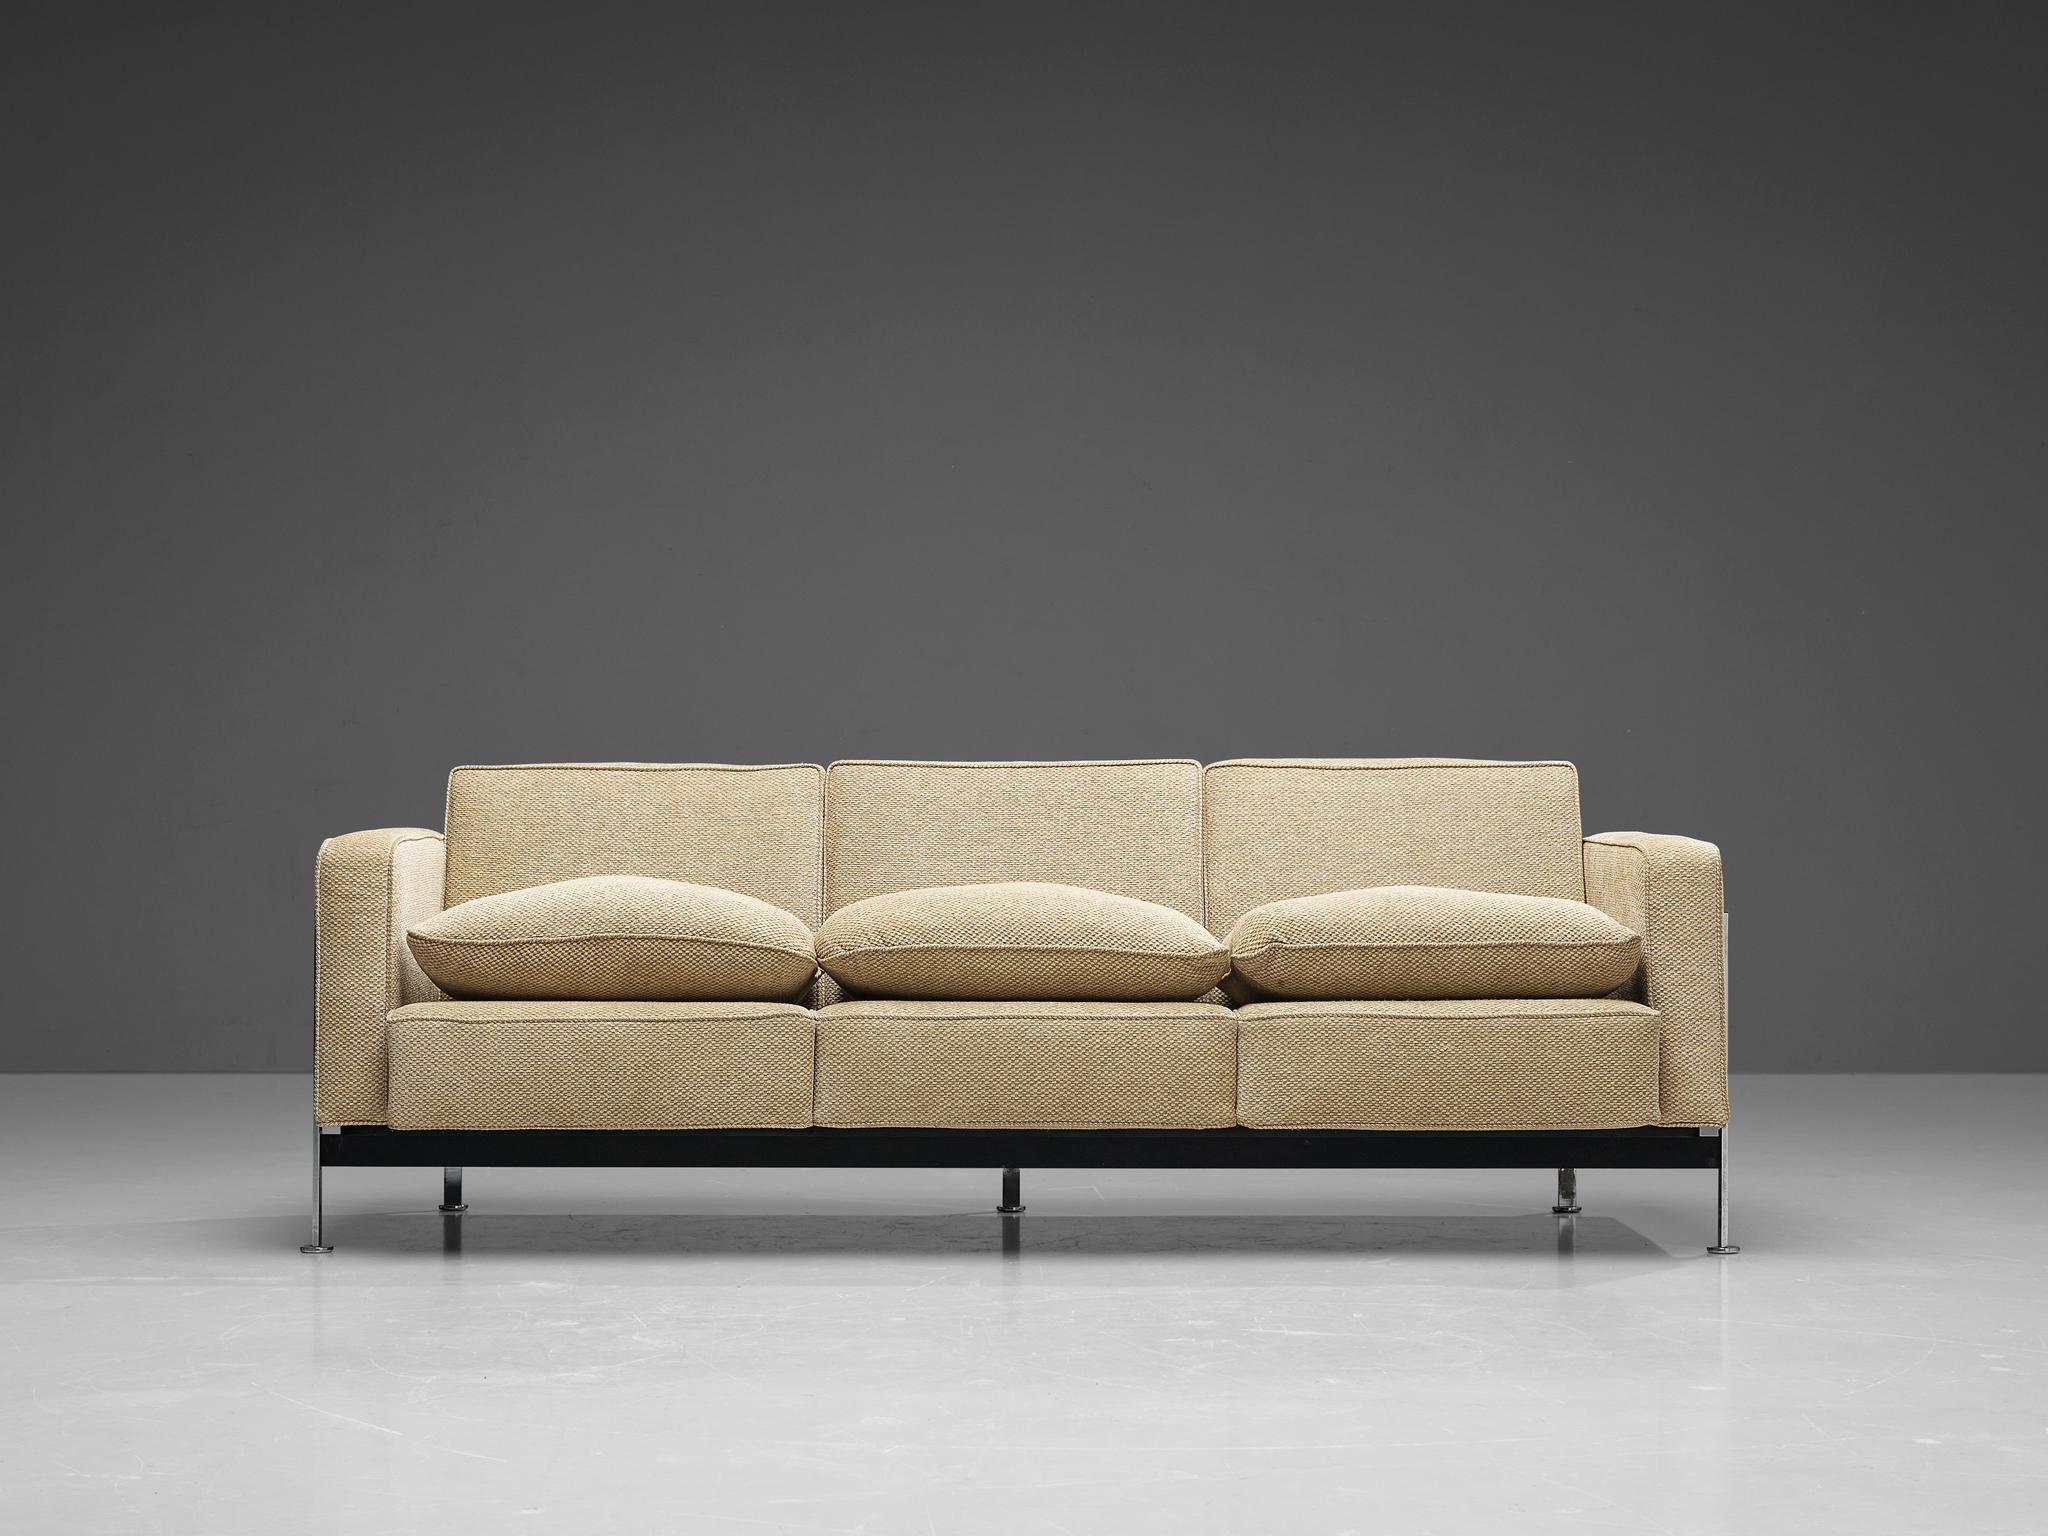 Robert Haussman for De Sede, three-seat sofa, fabric and chrome plated metal, Switzerland, design 1954. 

This comfortable three-seat sofa is designed by Robert Haussmann for De Sede and features a chromed frame that functions as a basket for the